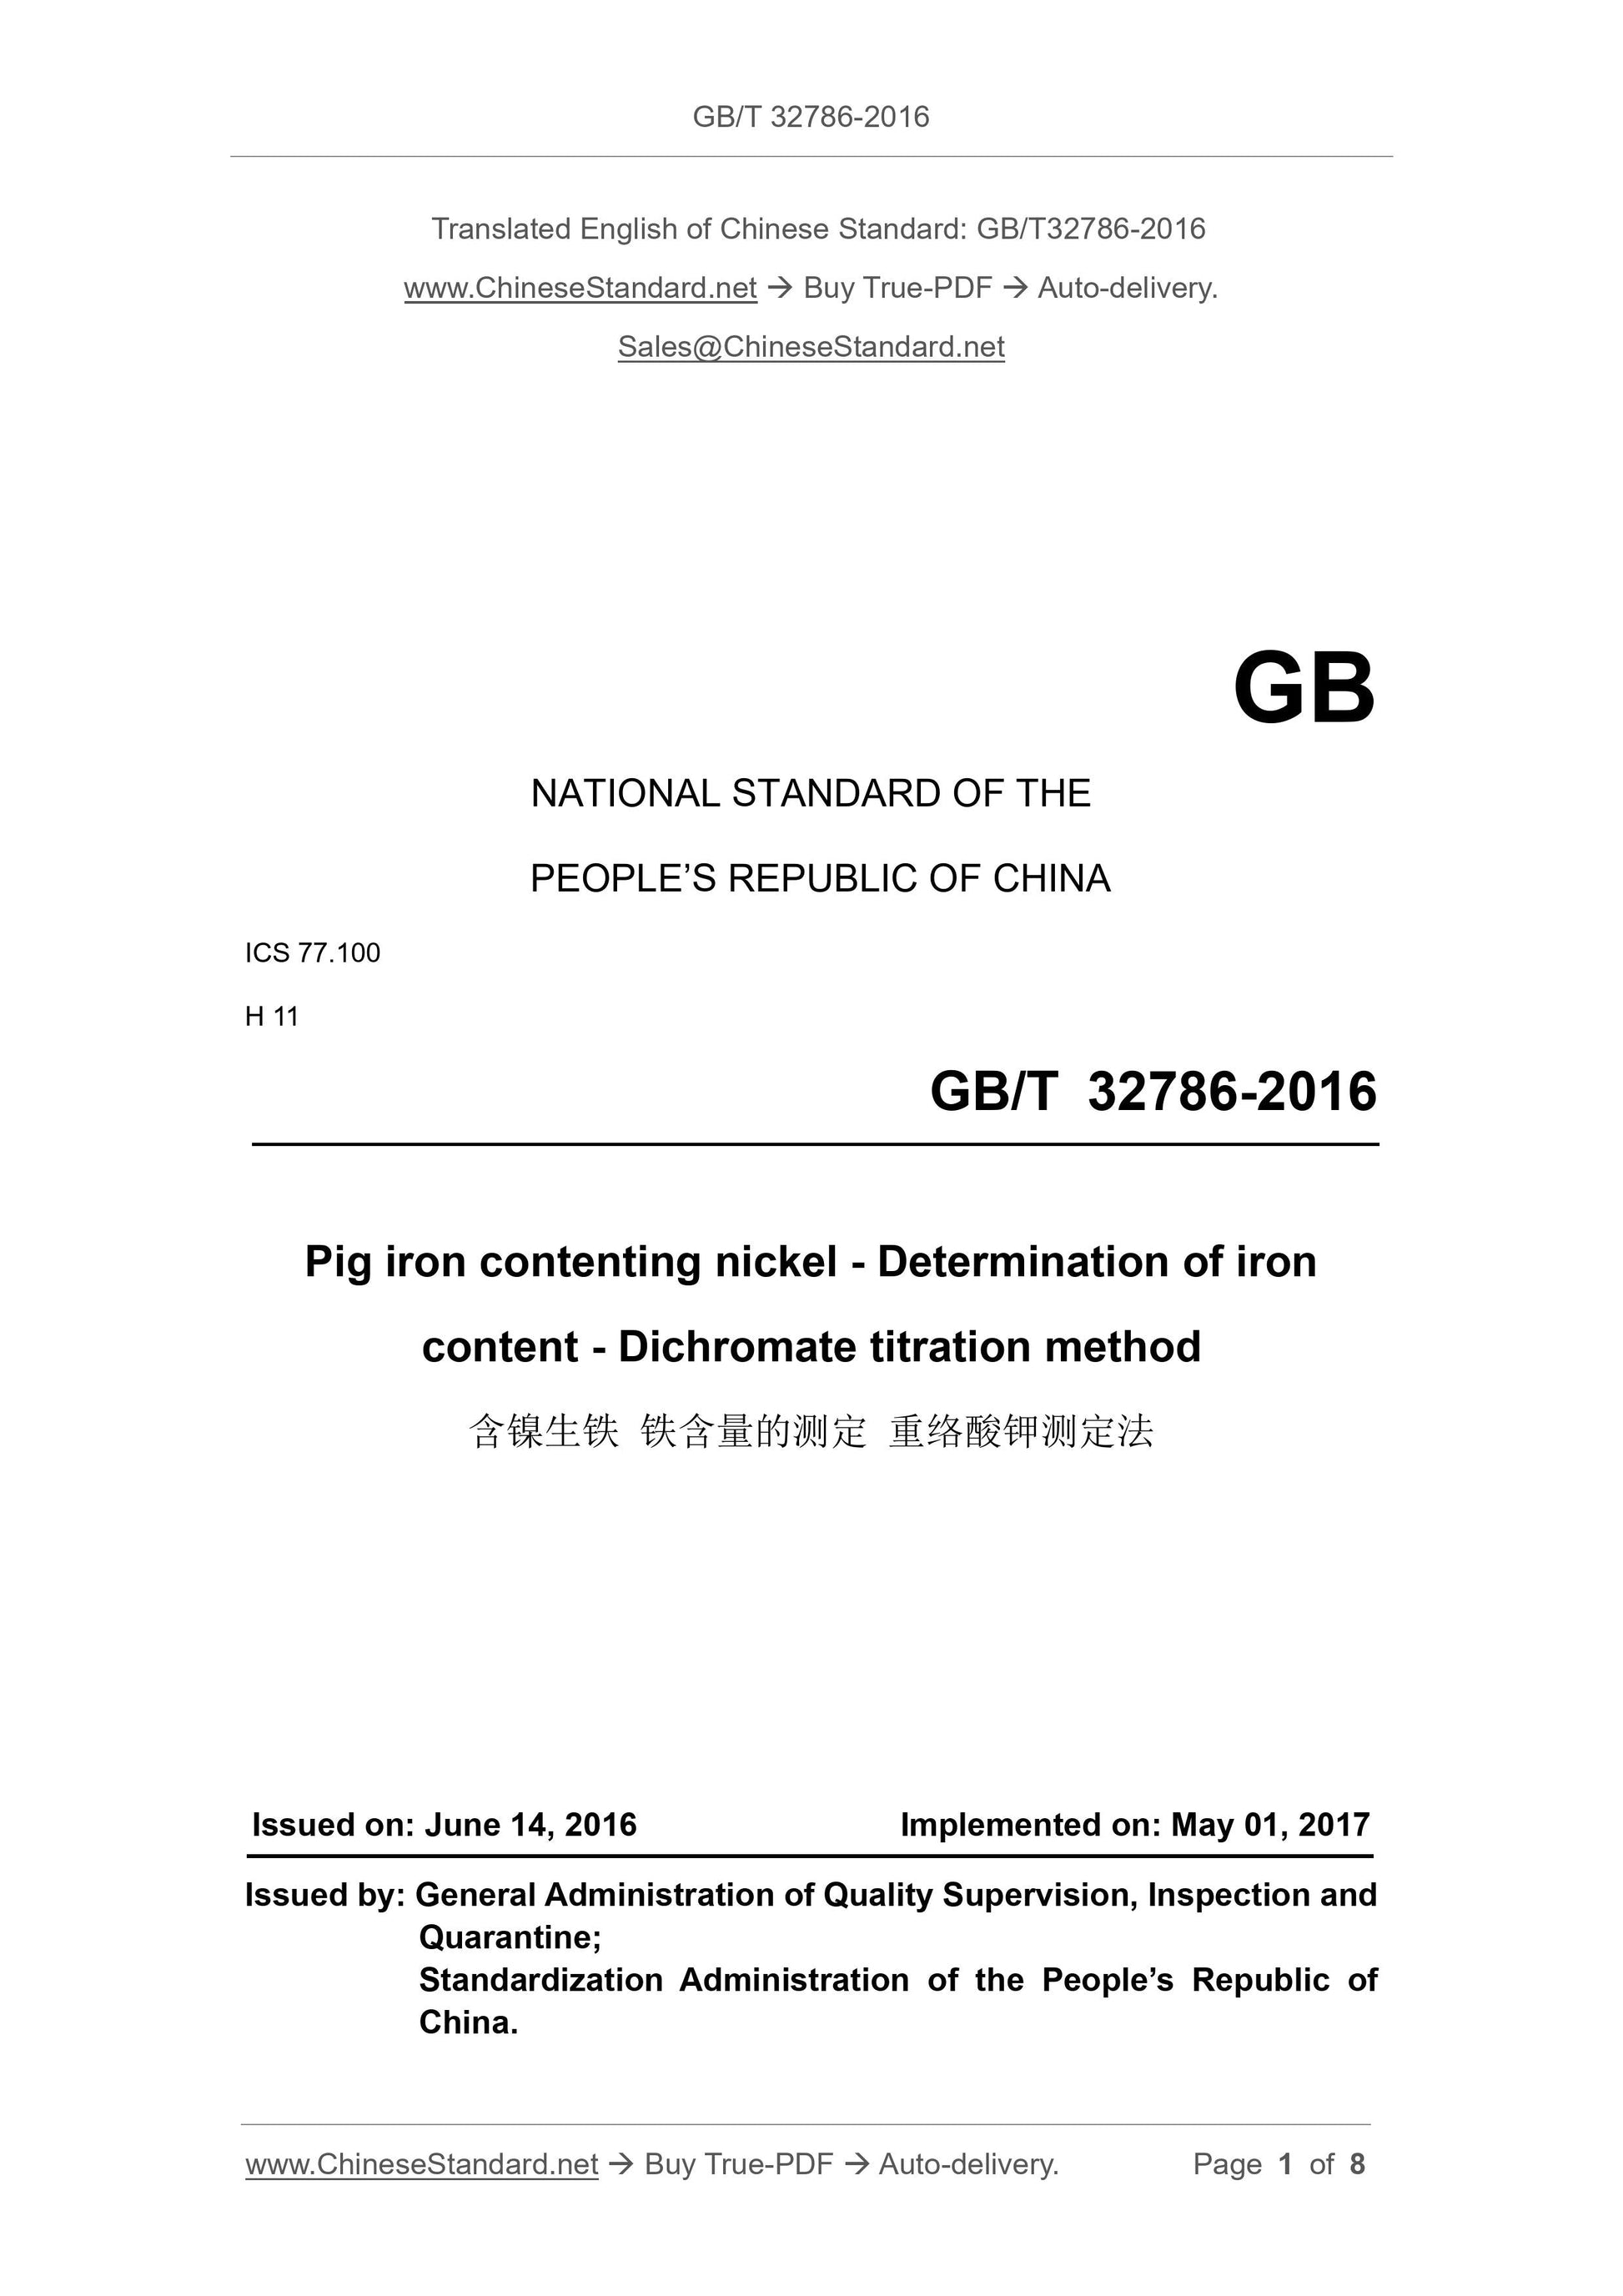 GB/T 32786-2016 Page 1